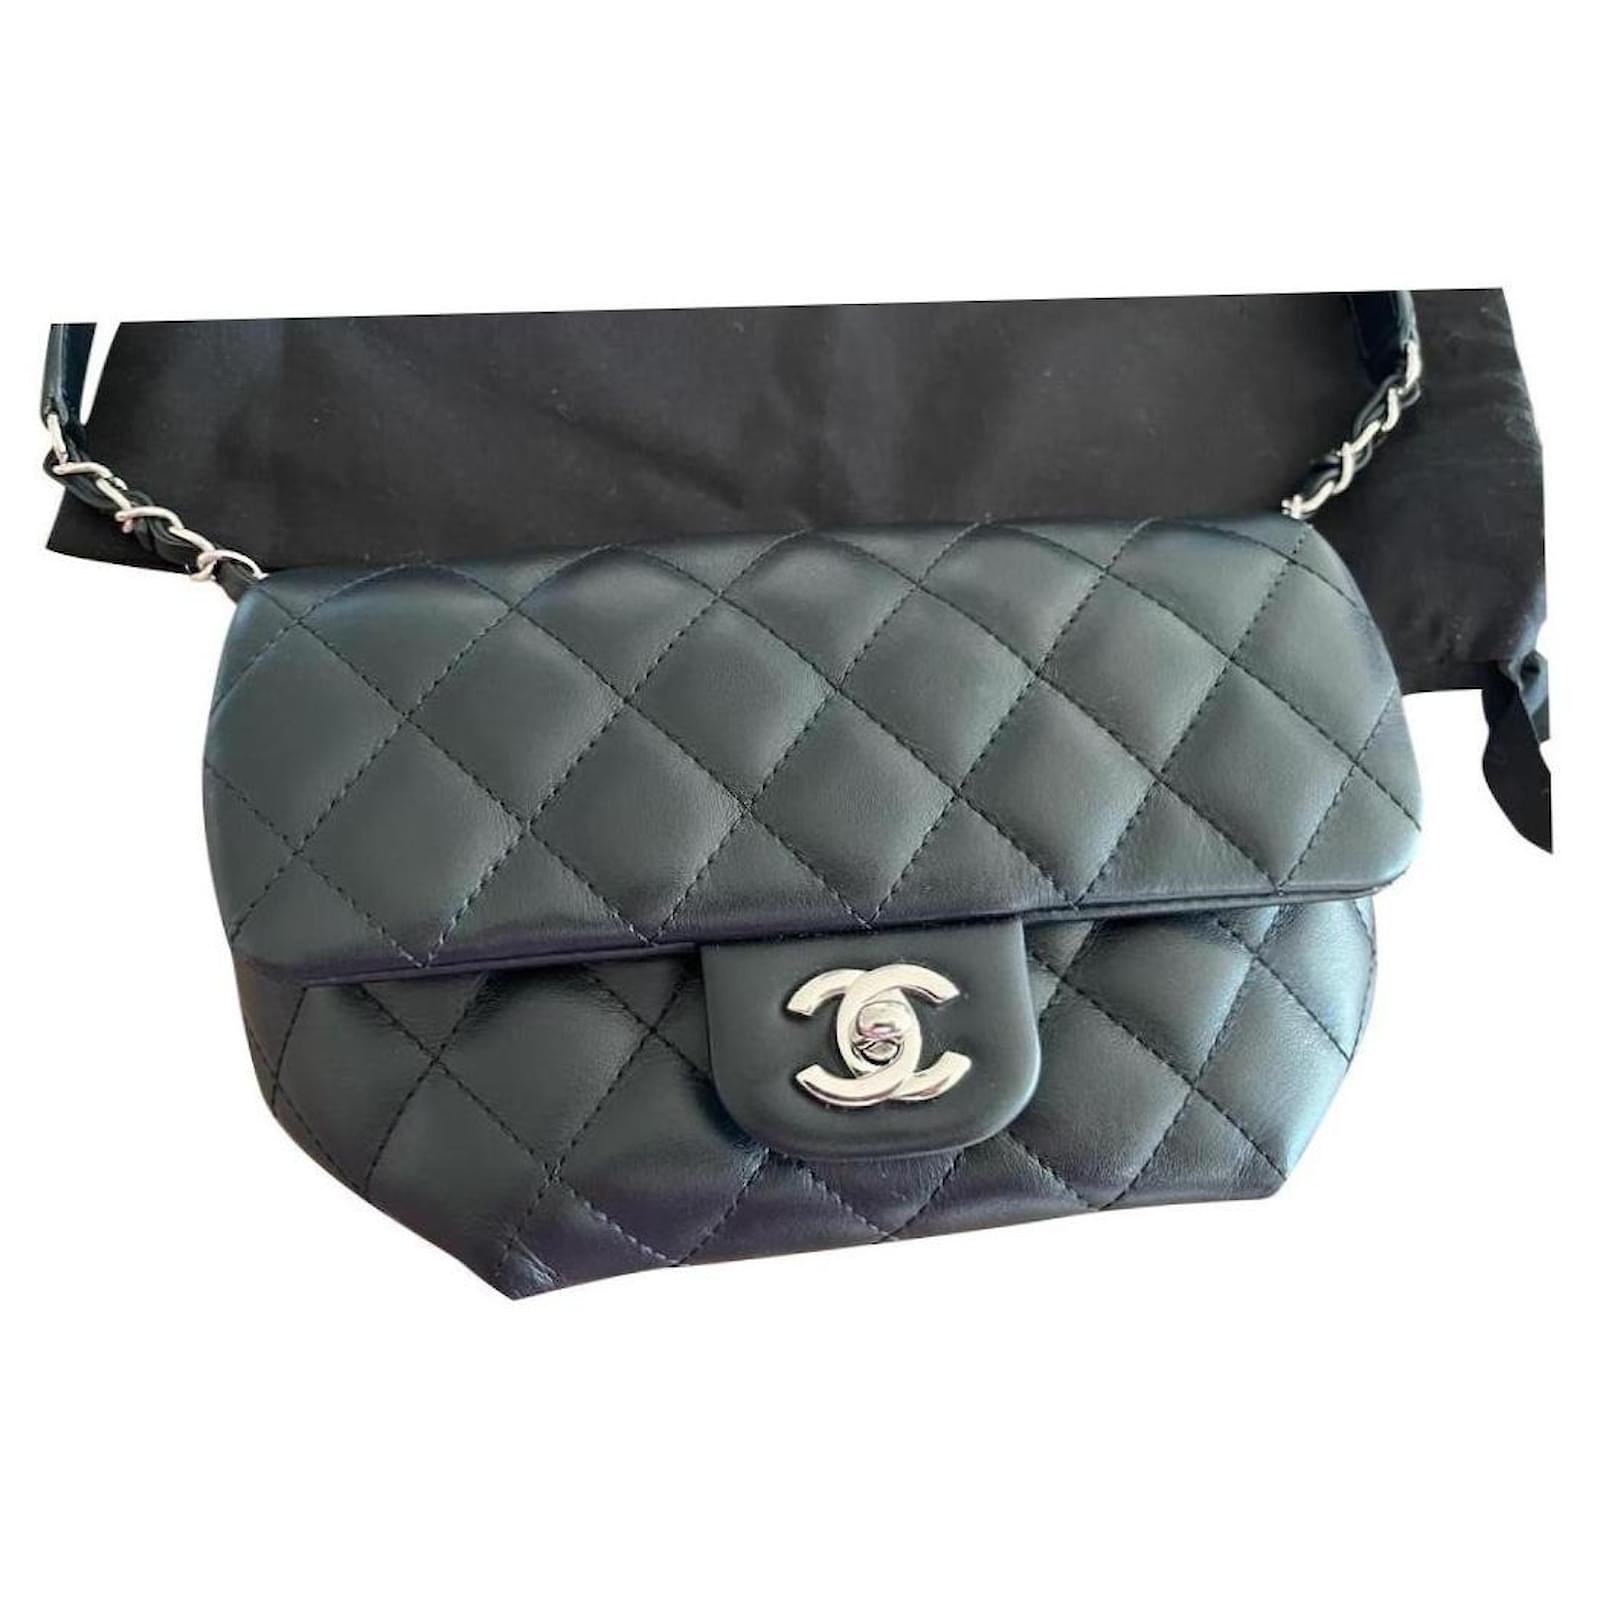 CHANEL Caviar Leather Exterior Clutch Bags & Handbags for Women